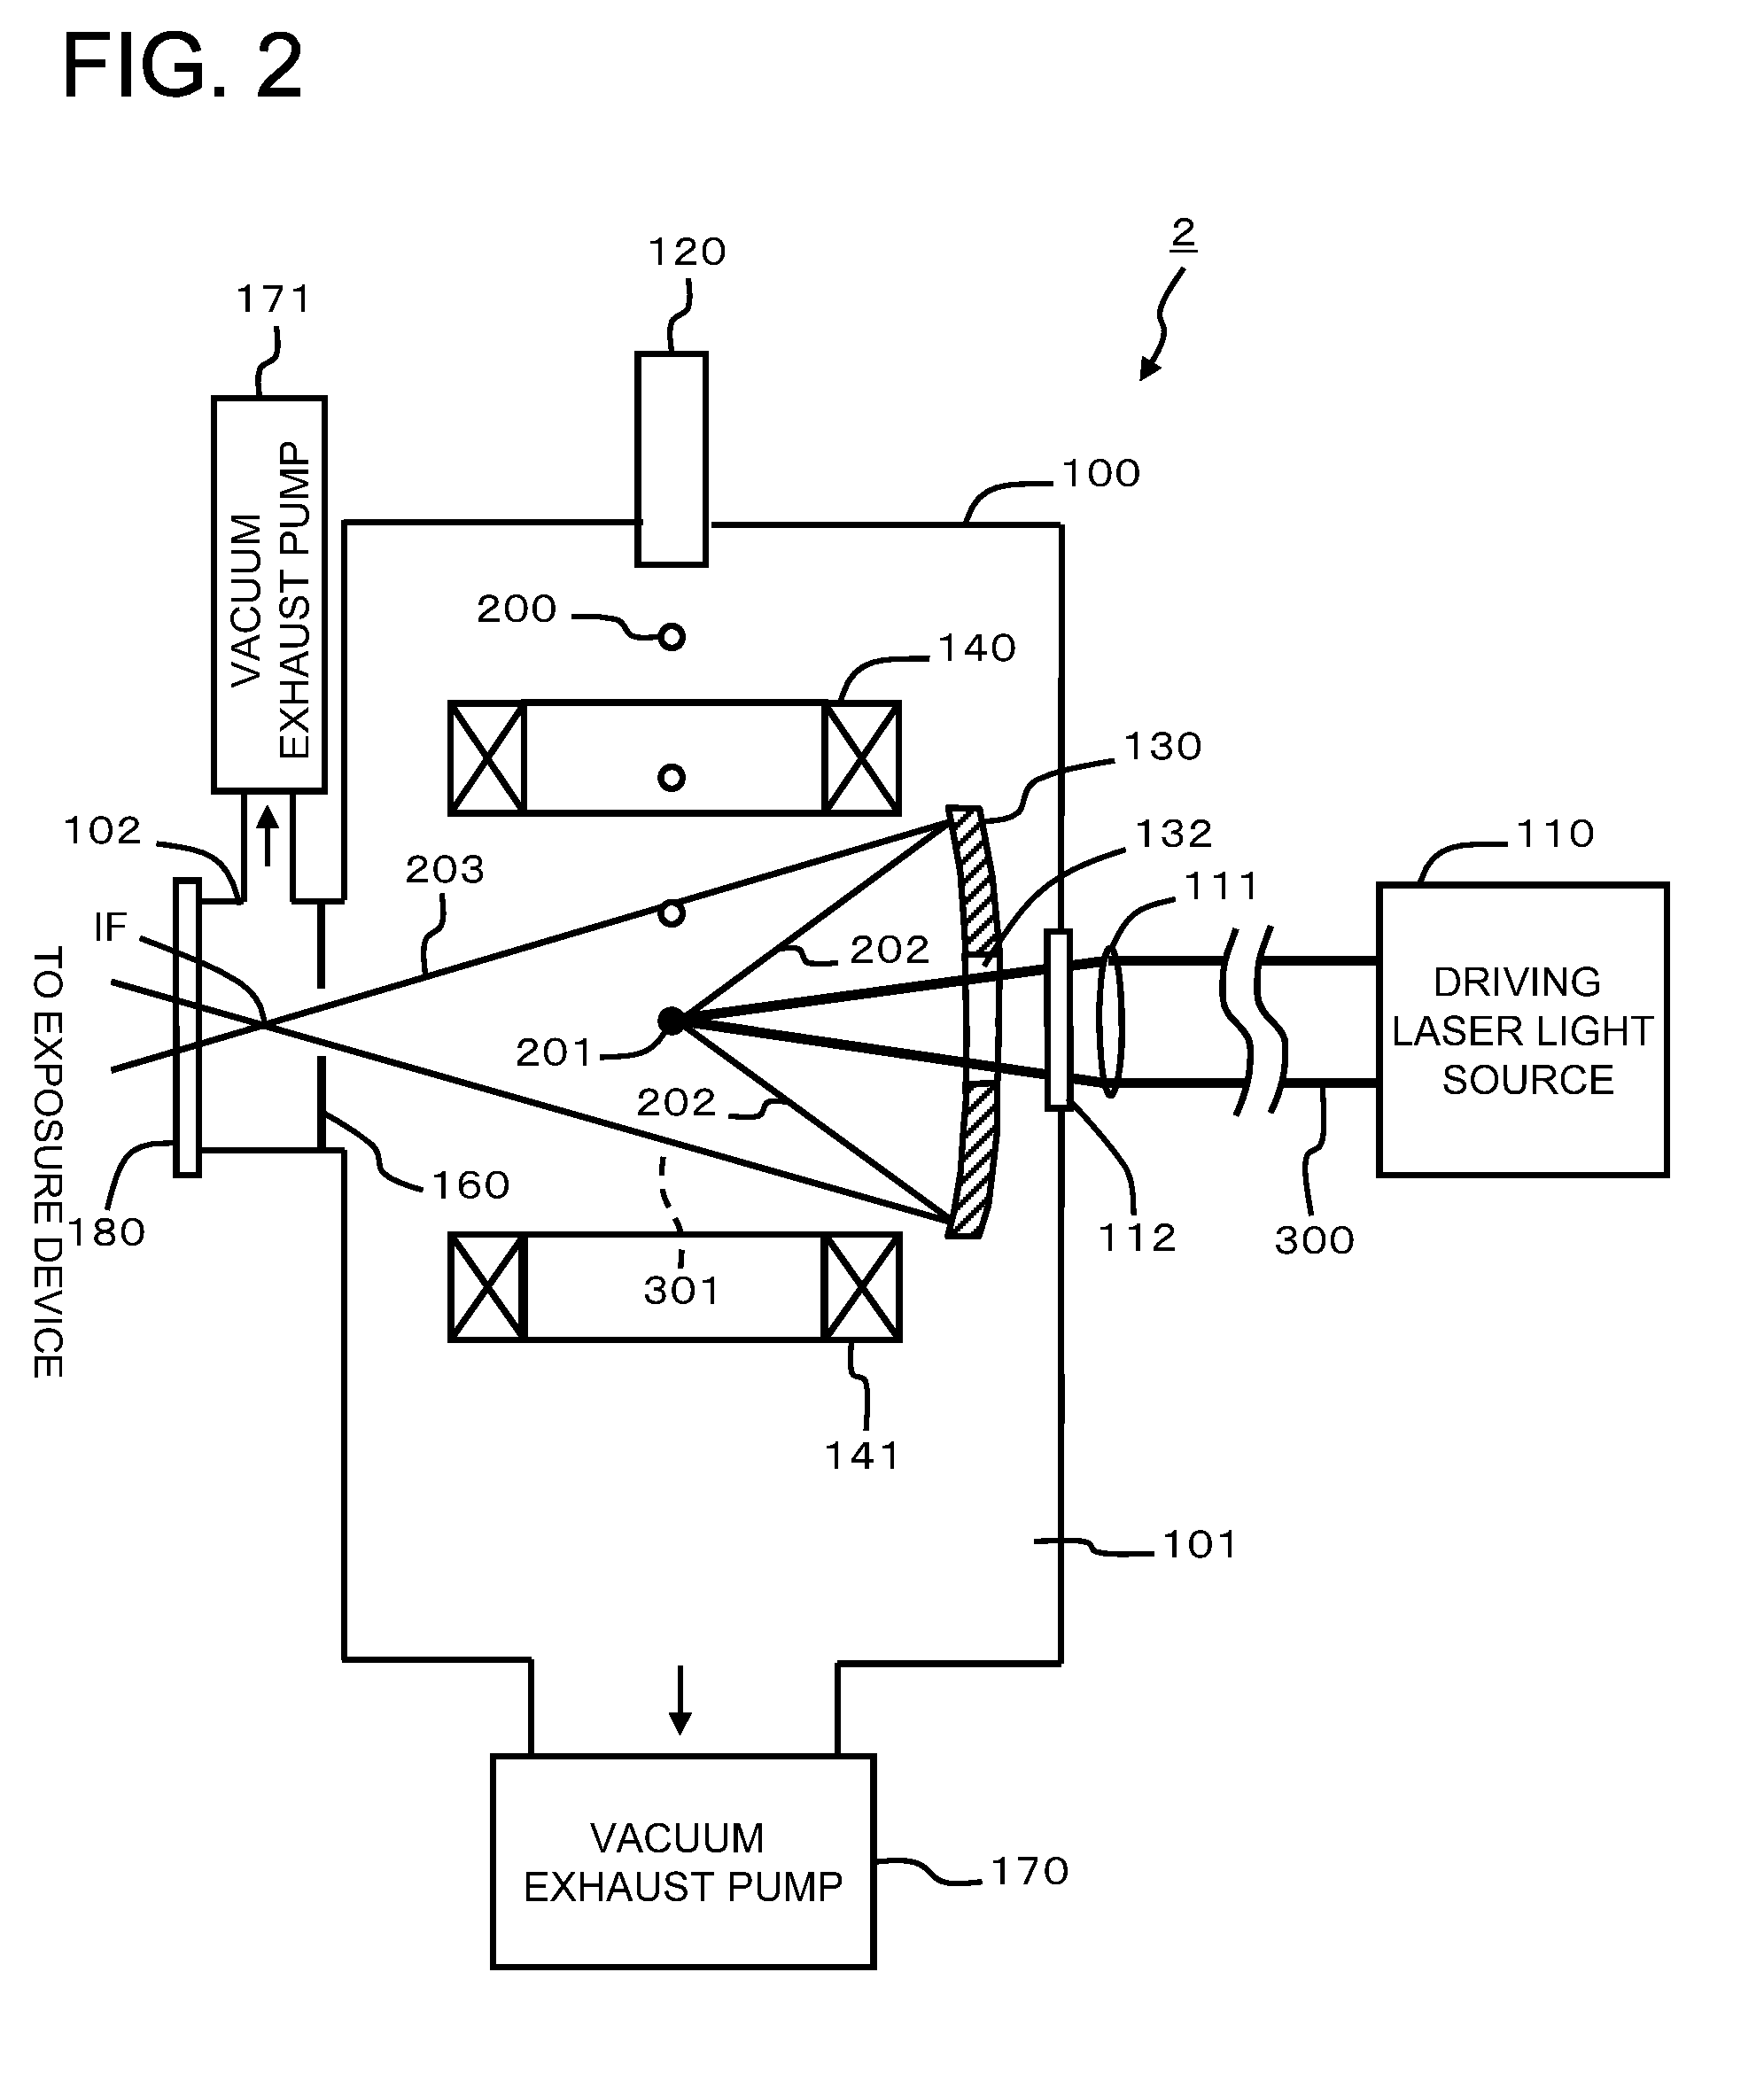 Semiconductor exposure device using extreme ultra violet radiation